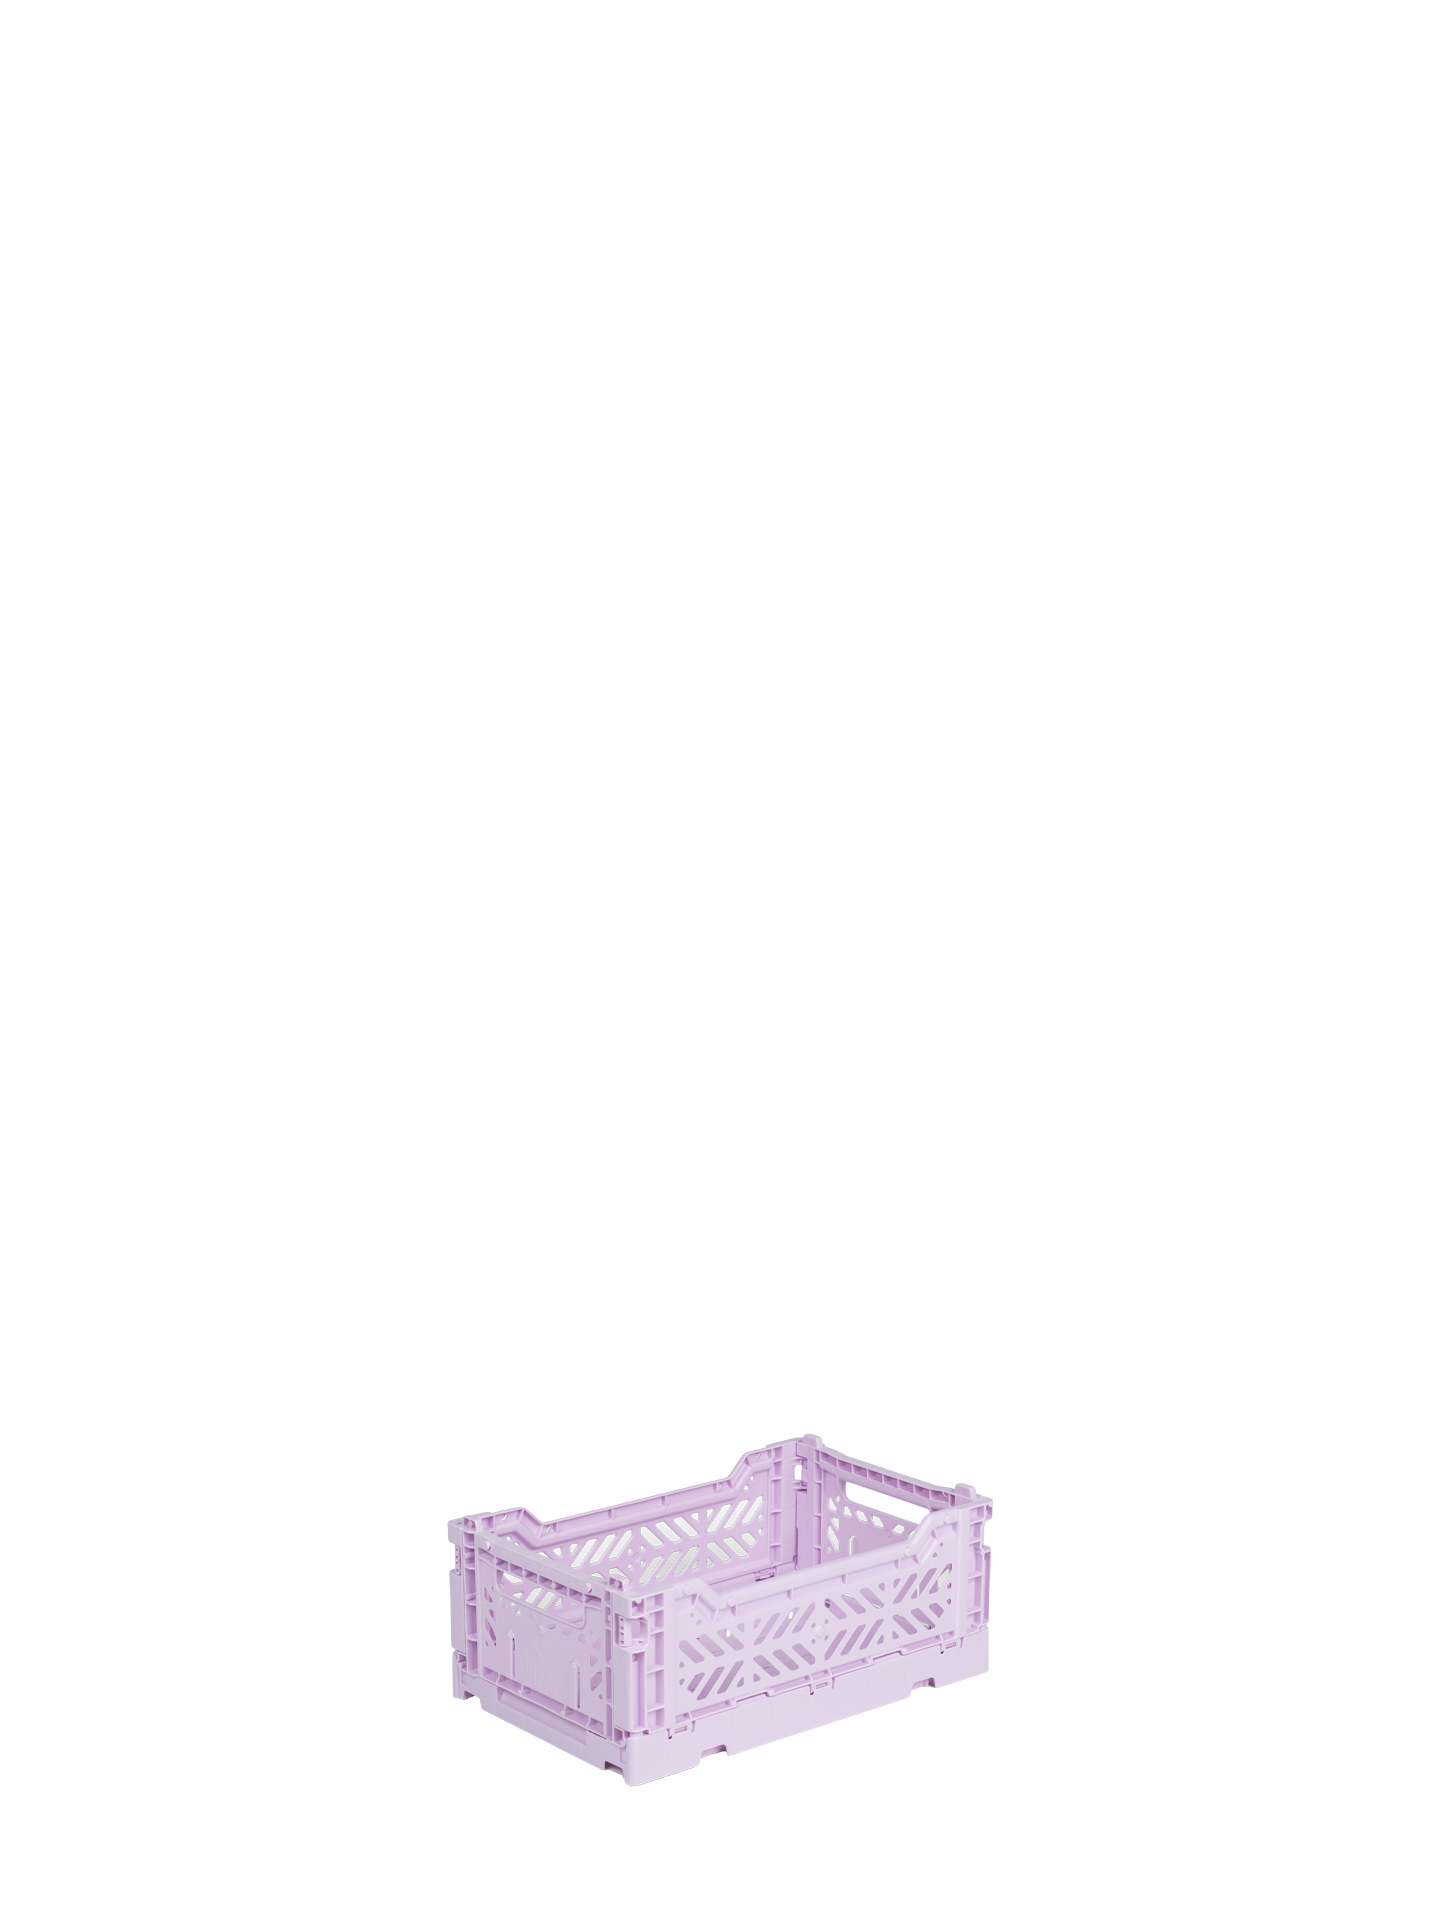 Mini Aykasa crate in pastel orchid lilac stacks and folds